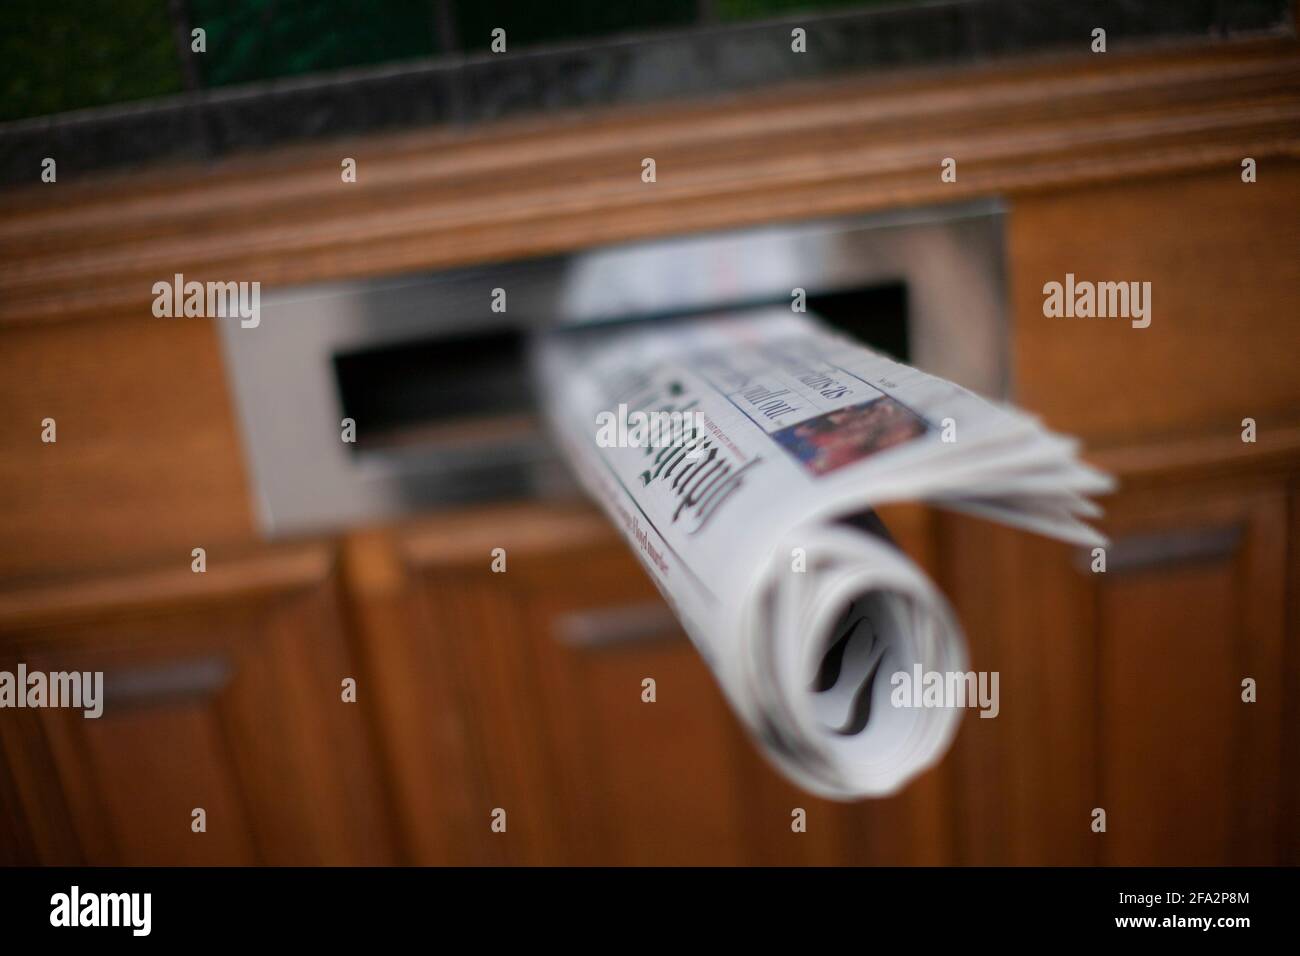 The Daily Telegraph British Daily newspaper Daily newspaper in front door  letterbox Stock Photo